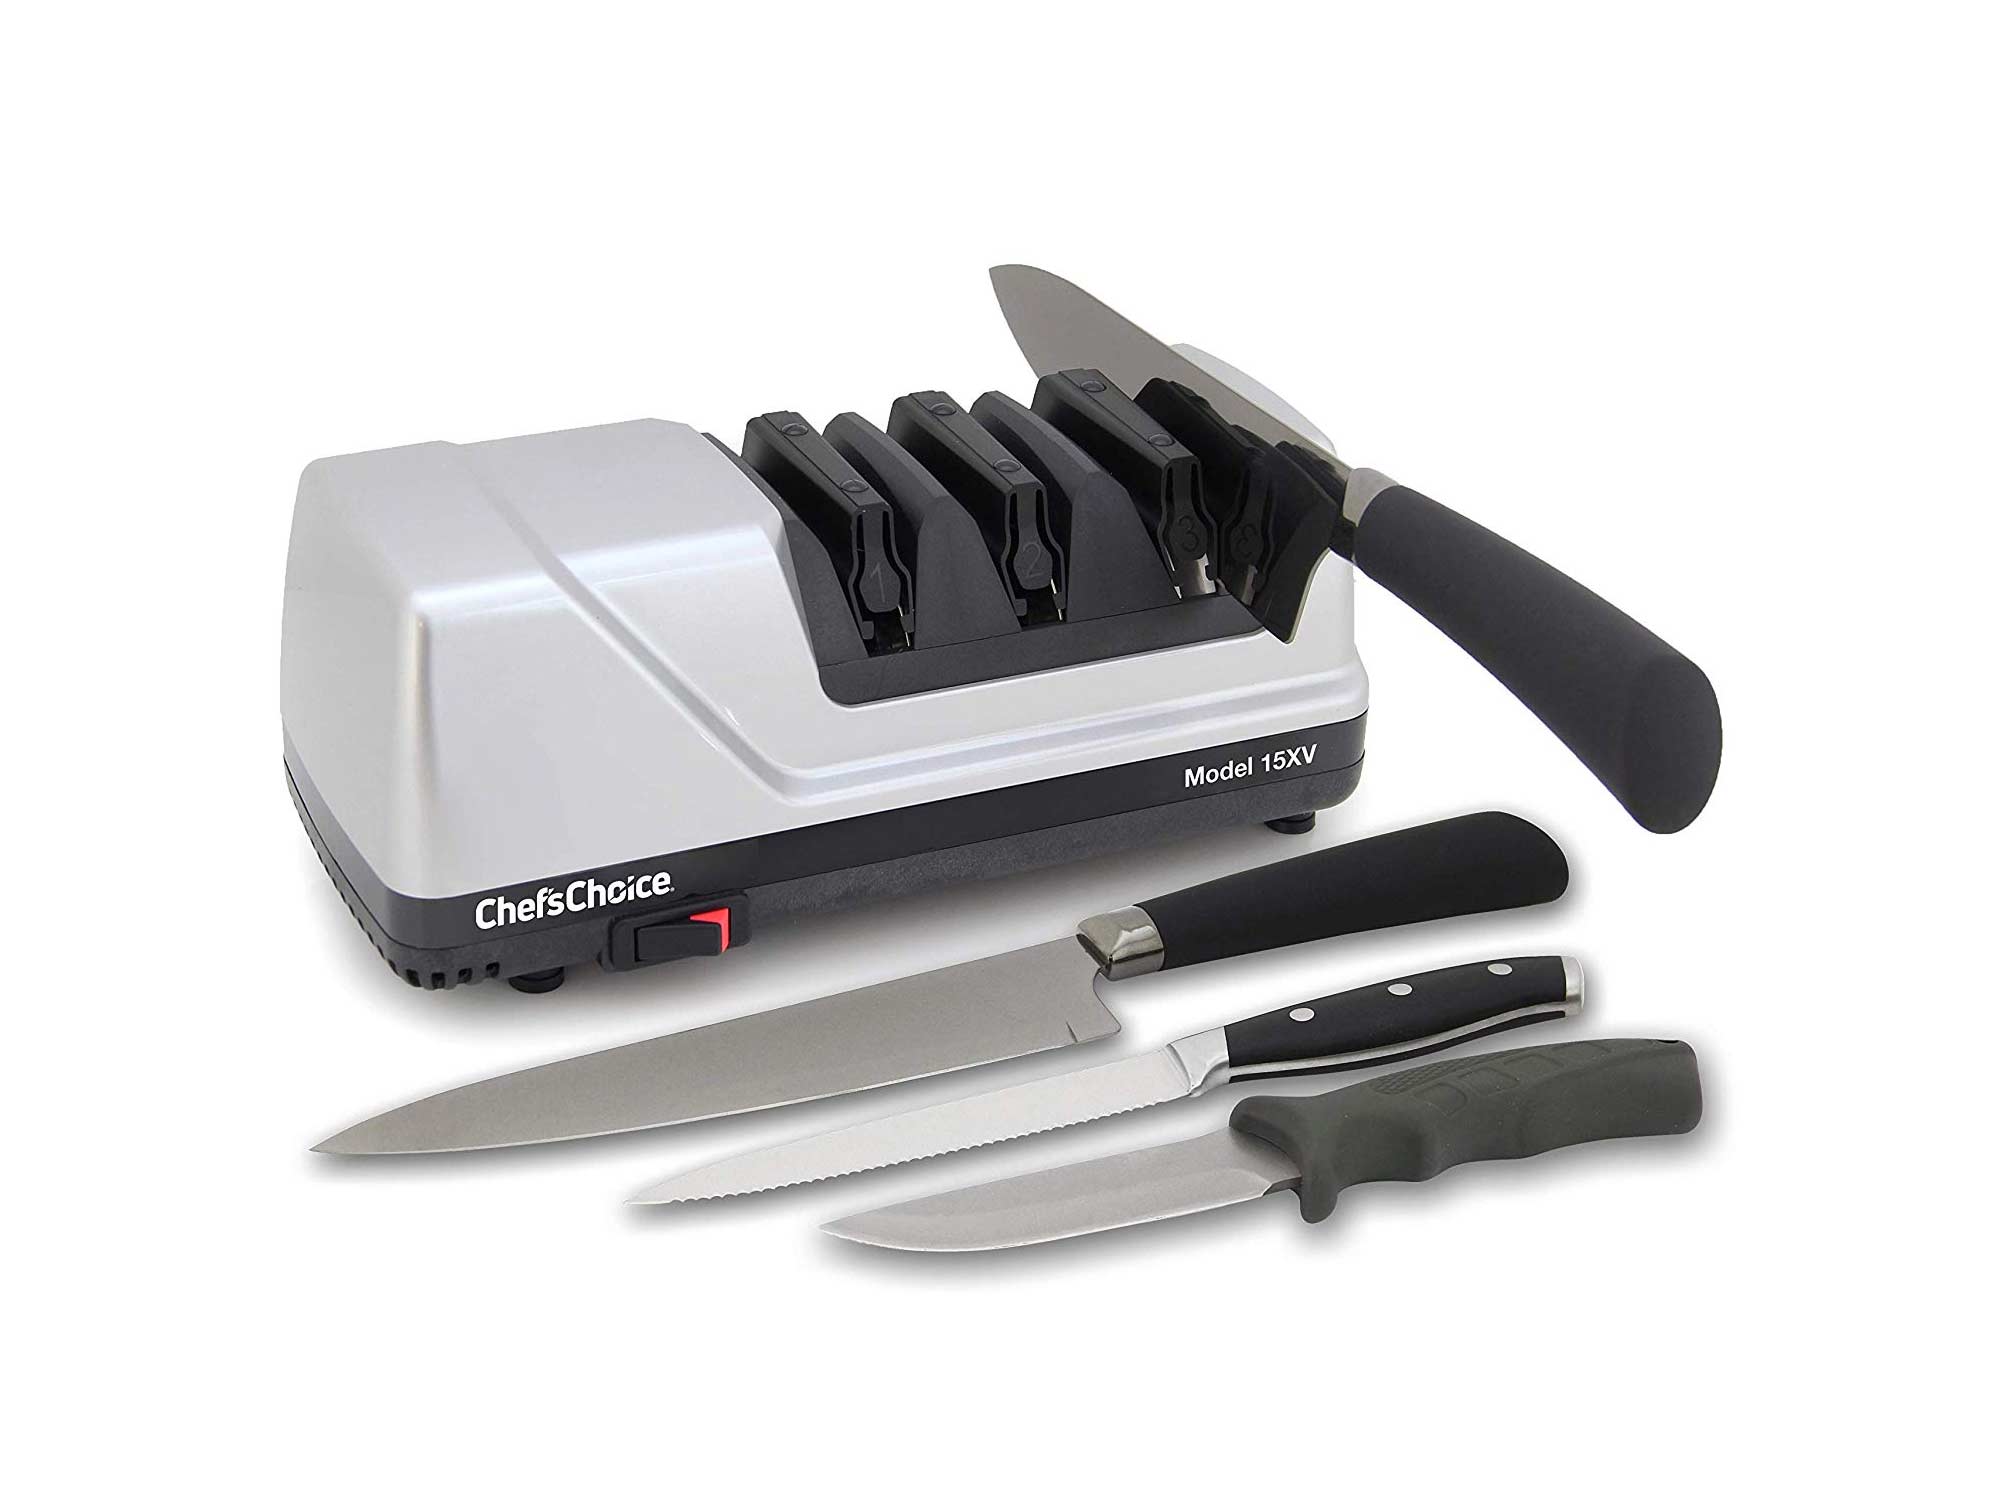 A three-stage sharpener will give you the most control while repairing the edge of your knives.